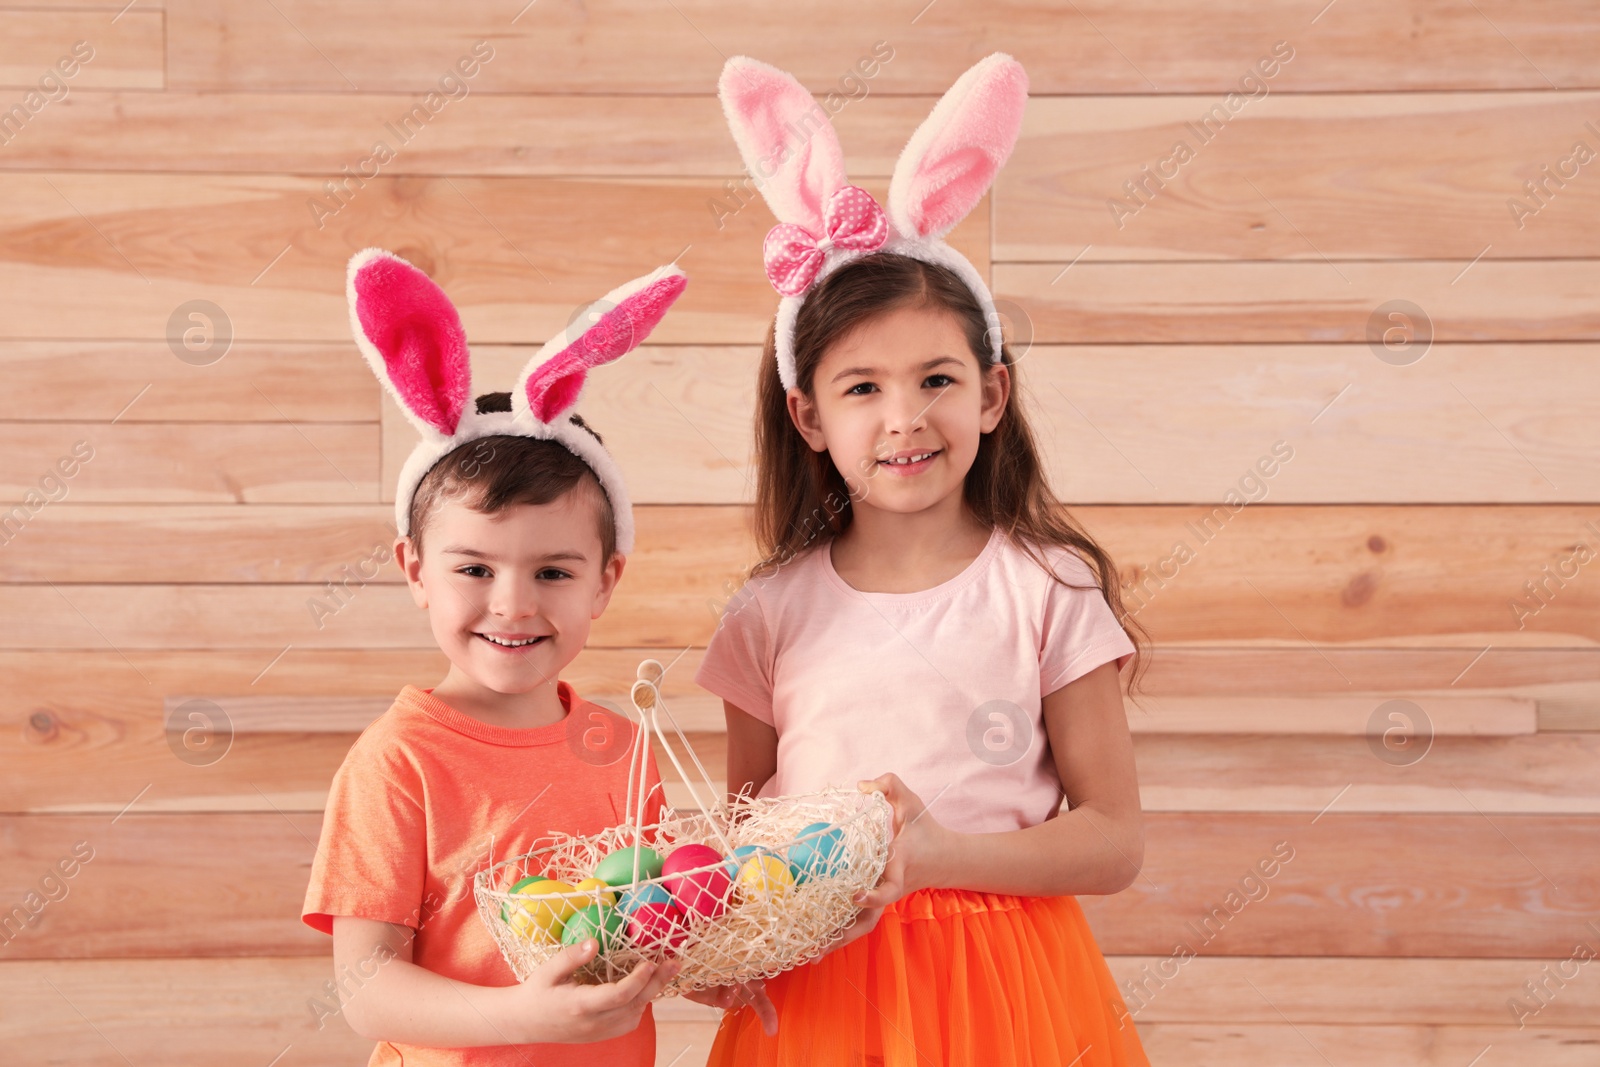 Photo of Cute children in bunny ears headbands holding basket with Easter eggs against wooden background